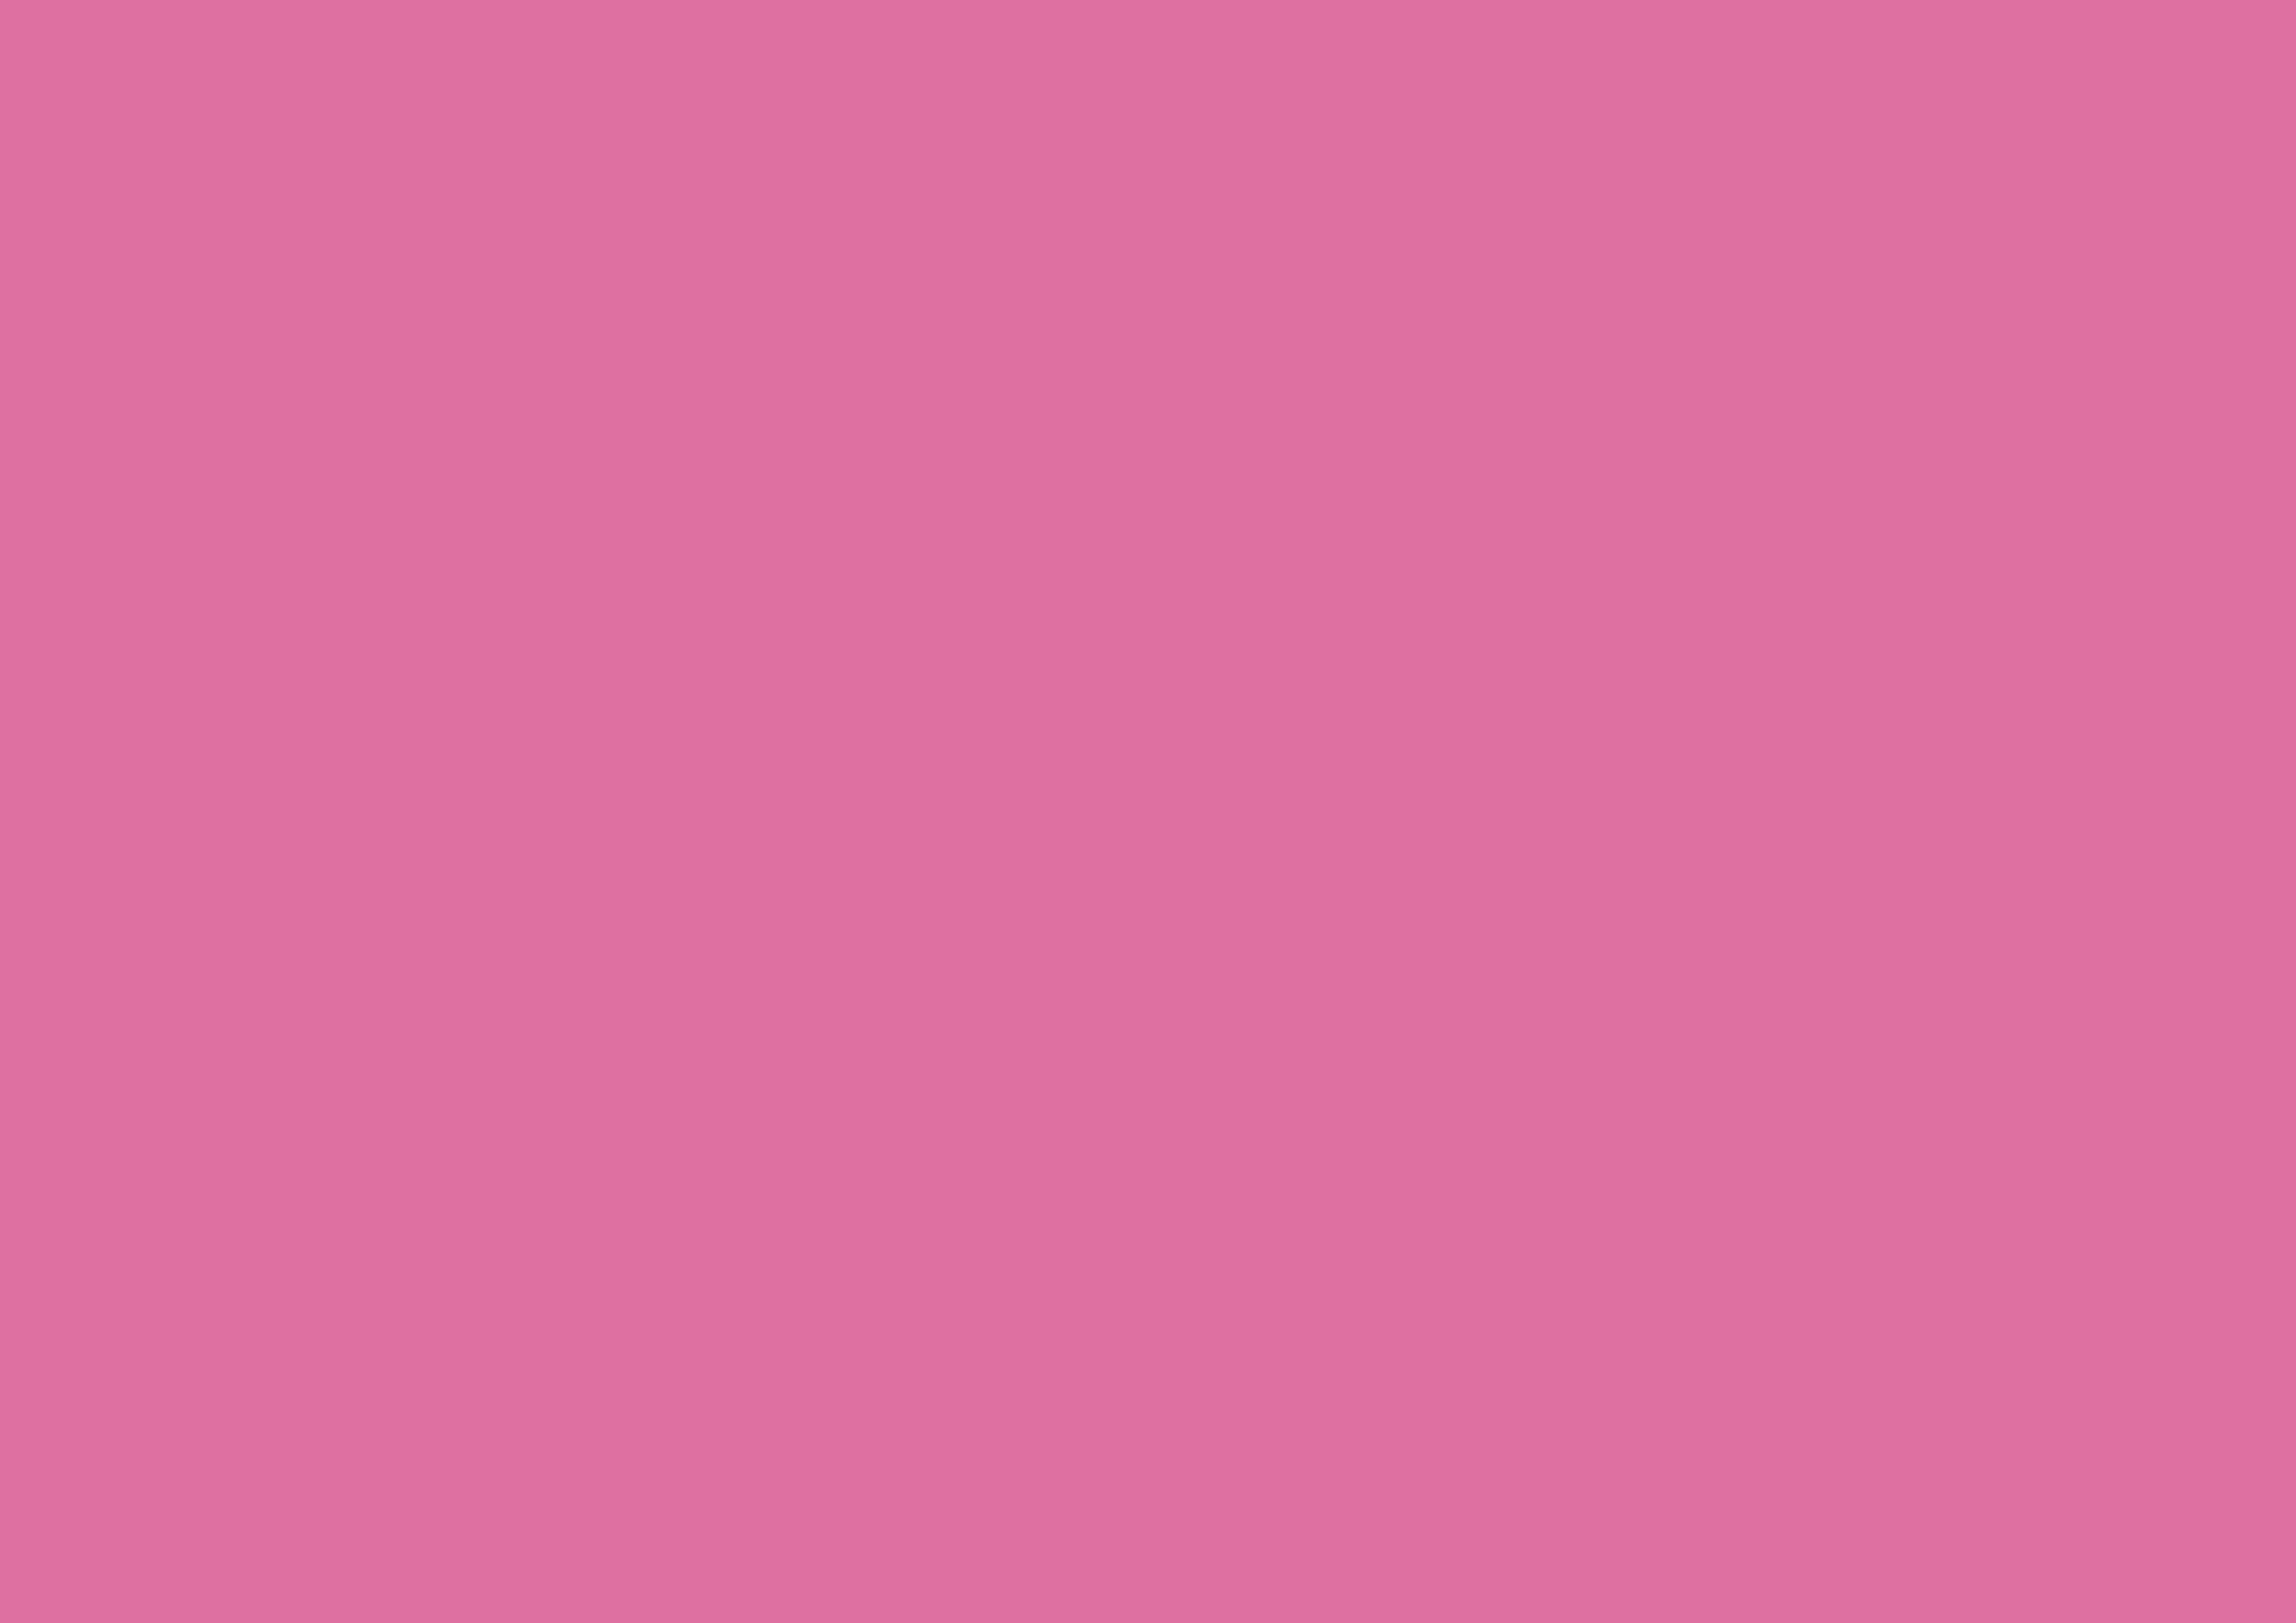 3508x2480 China Pink Solid Color Background